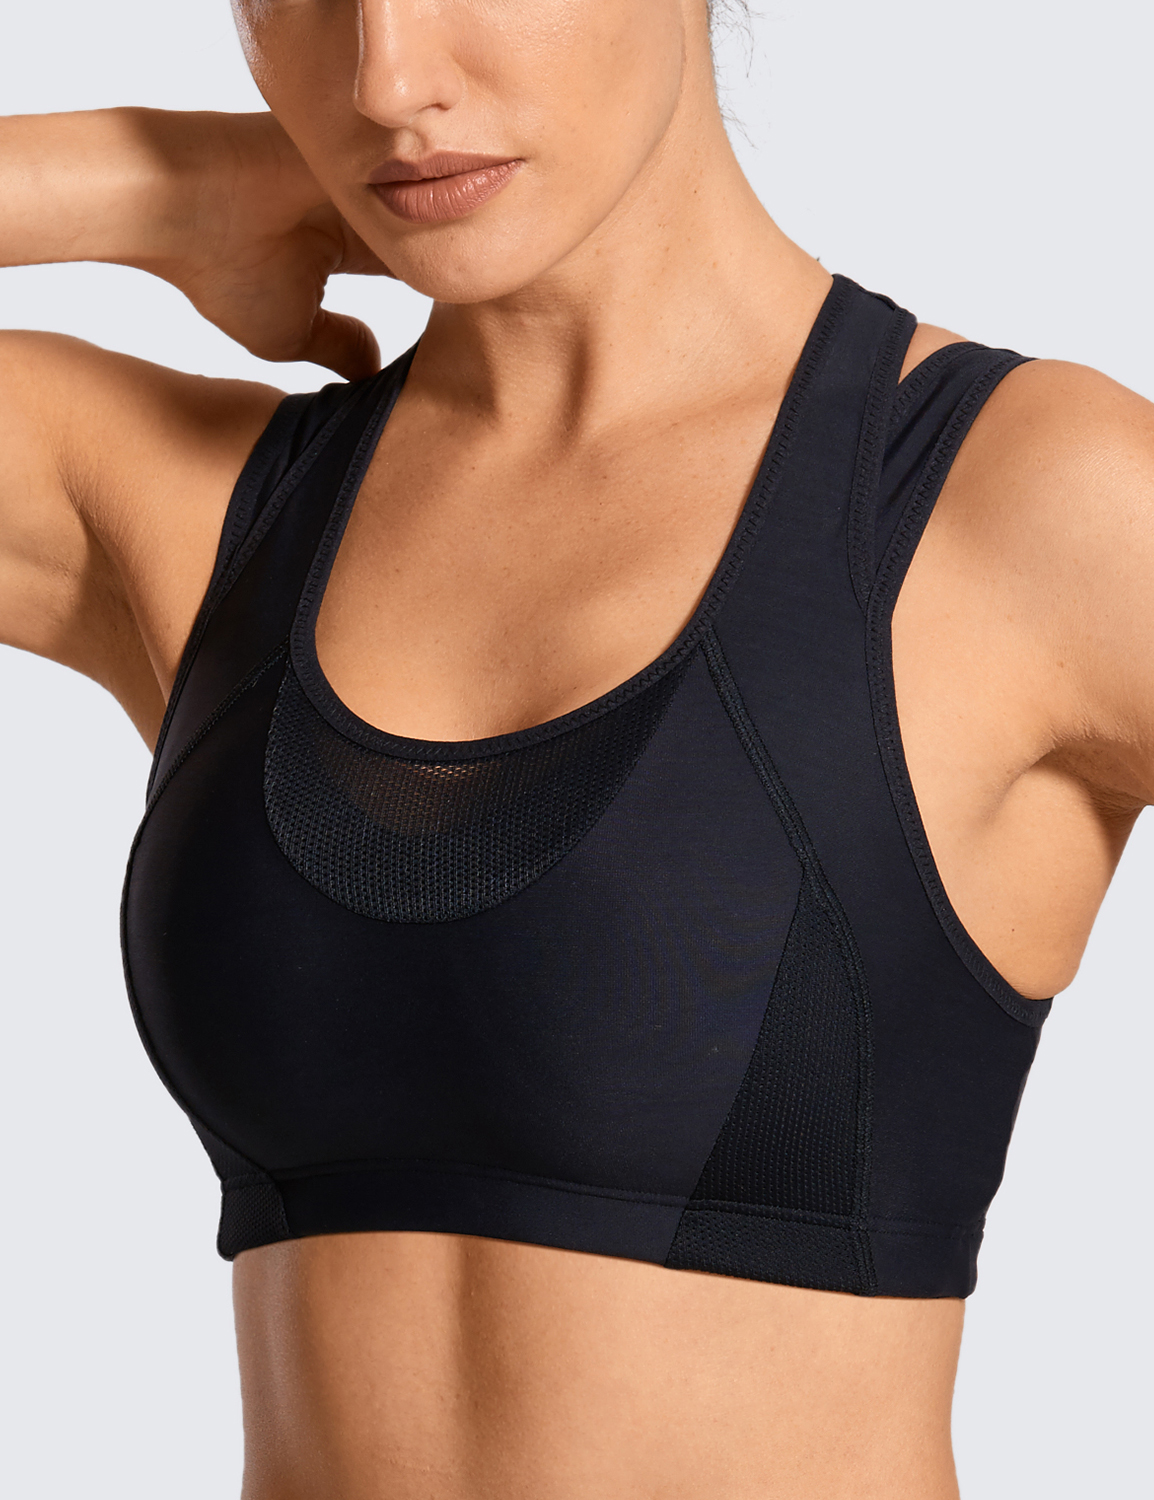 Syrokan Women'S Workout Sports Bra High Impact Support Bounce Control Wirefree M 